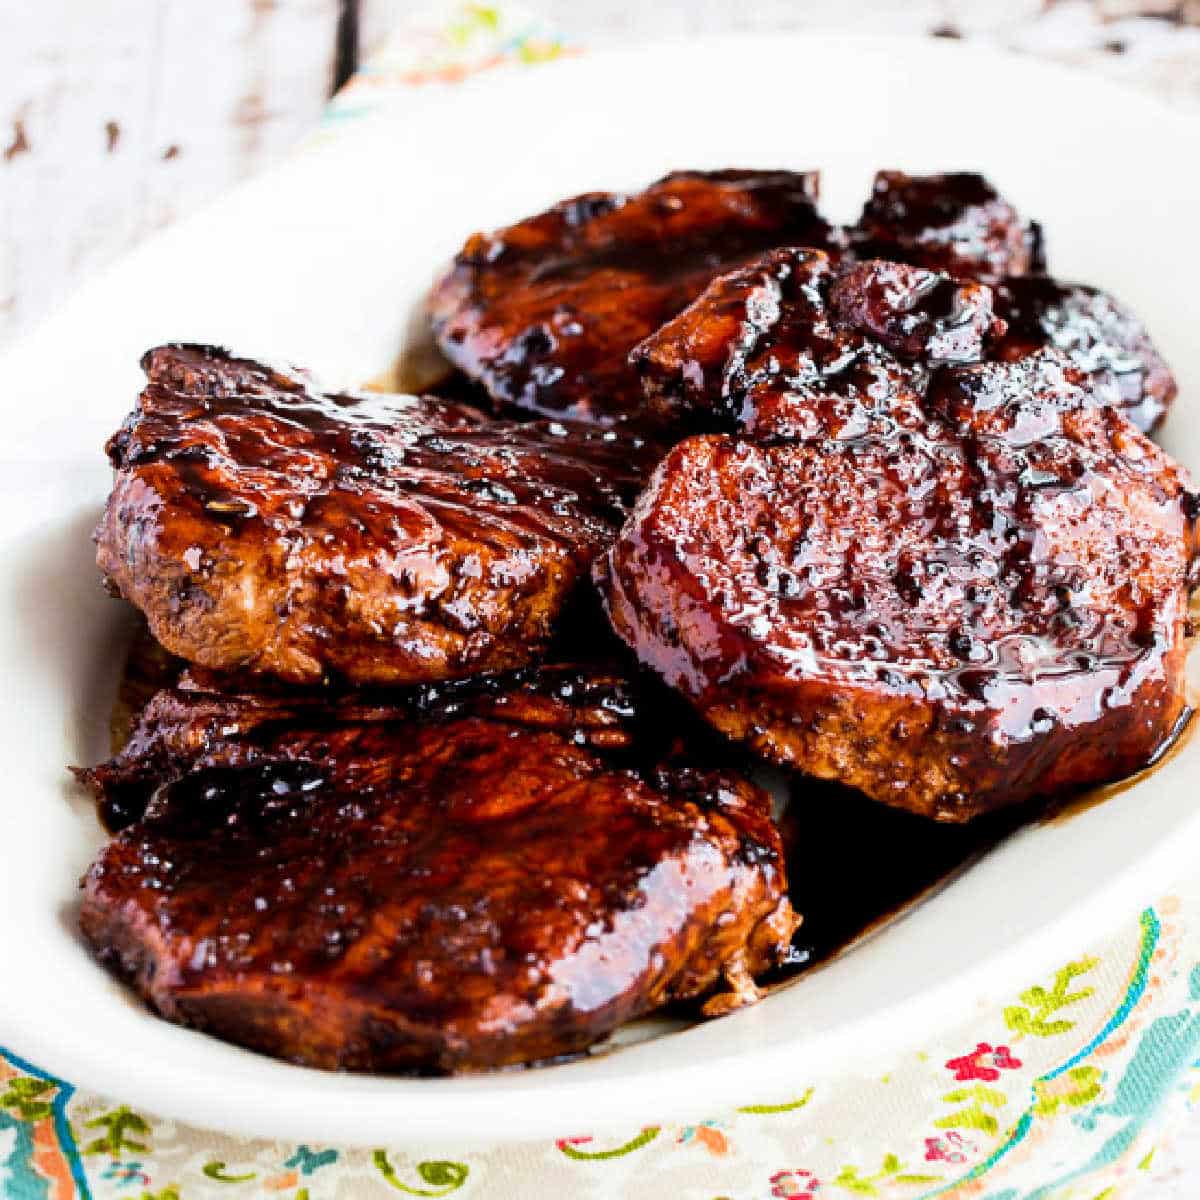 Square image of pork chops with balsamic glaze shown on a serving platter.